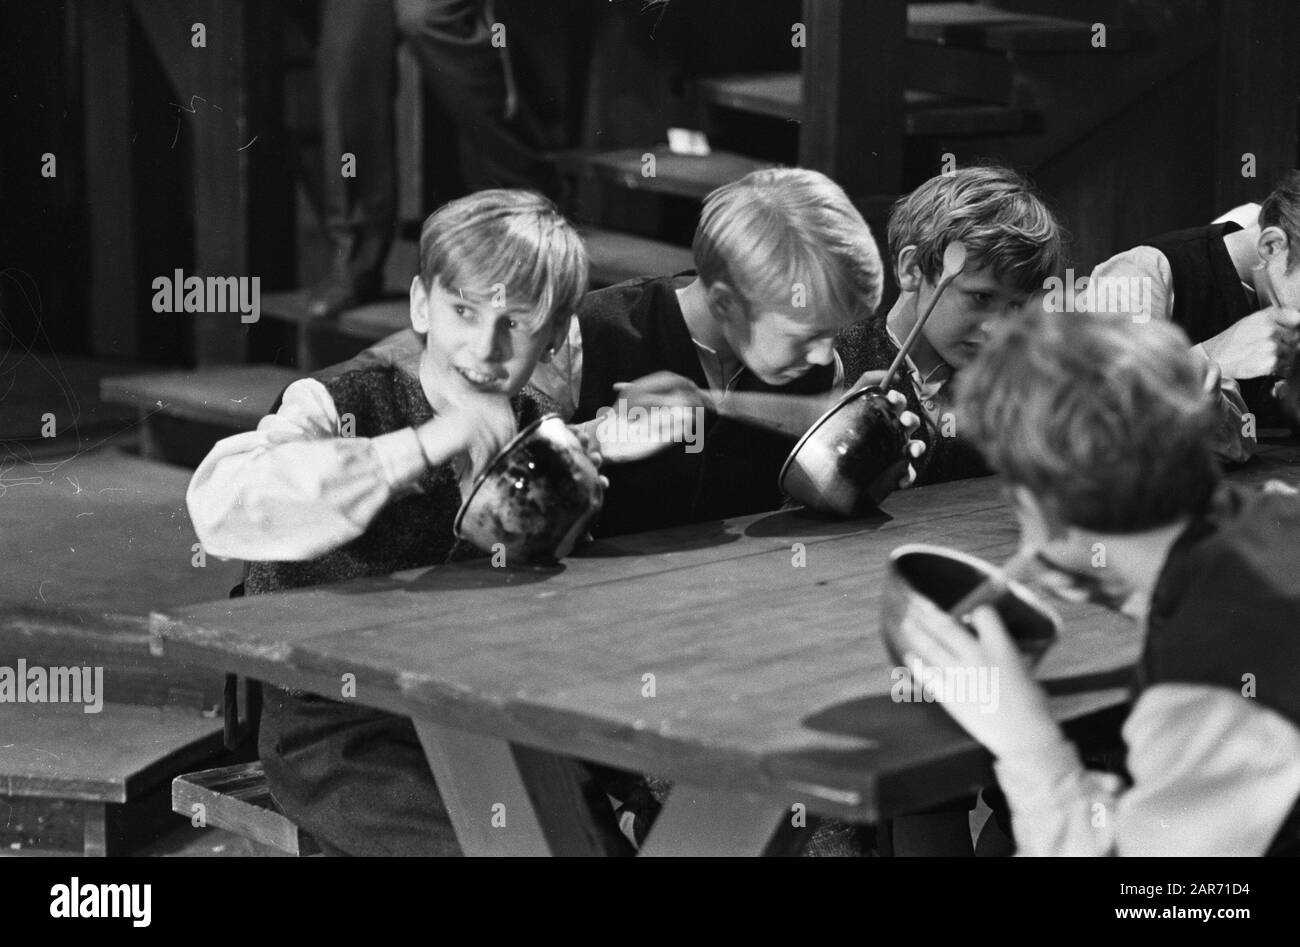 Oliver in the Netherlands during rehearsal Gerard Walters, Jan Nelissen and Peter Post, all as Oliver Date: September 30, 1963 Keywords: rehearsals Personal name: Oliver, Post, Peter Stock Photo